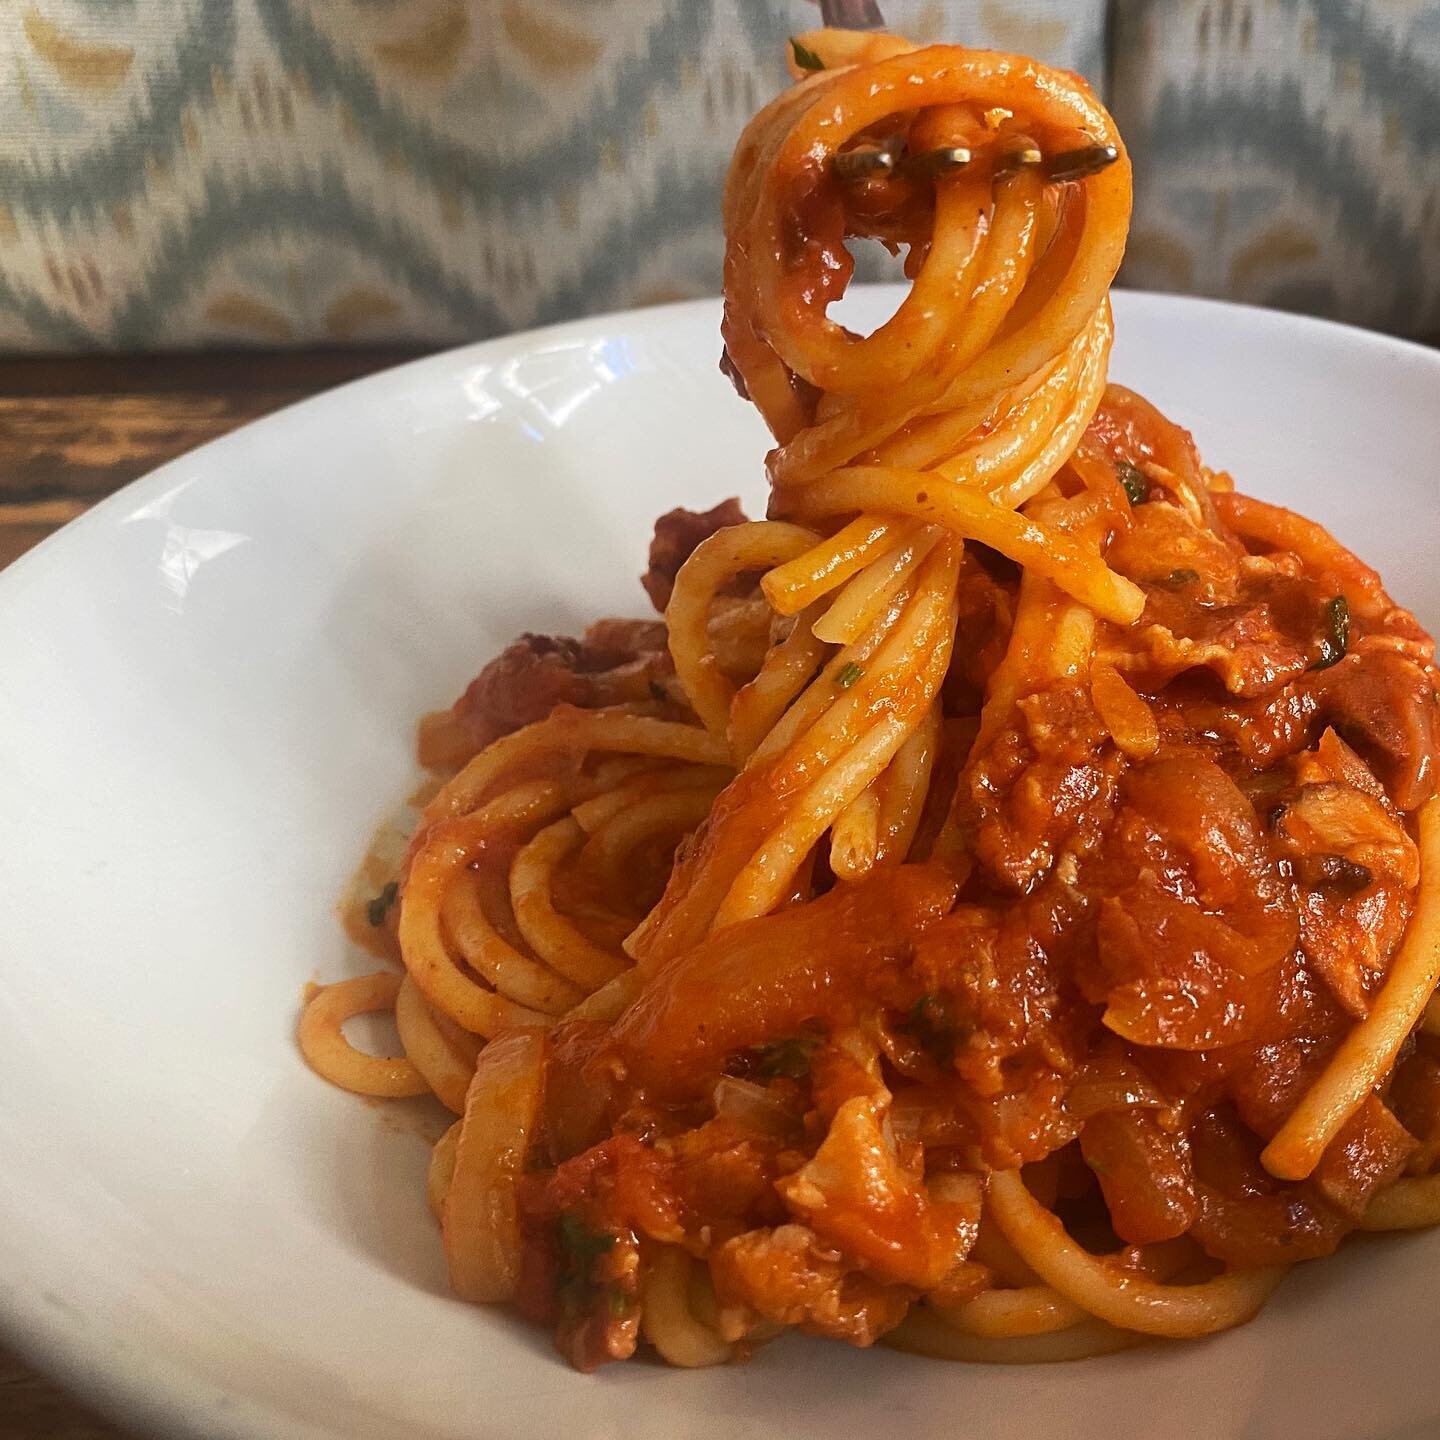 Dear friend, life can be pretty tough but you&rsquo;re doing great! 
Come reward yourself with our smoky, delicious Bucatini Amatriciana😍

⠀

⠀
#homemadepasta #amatriciana #smokinesssss #italiantastesbetter #brooklyngem